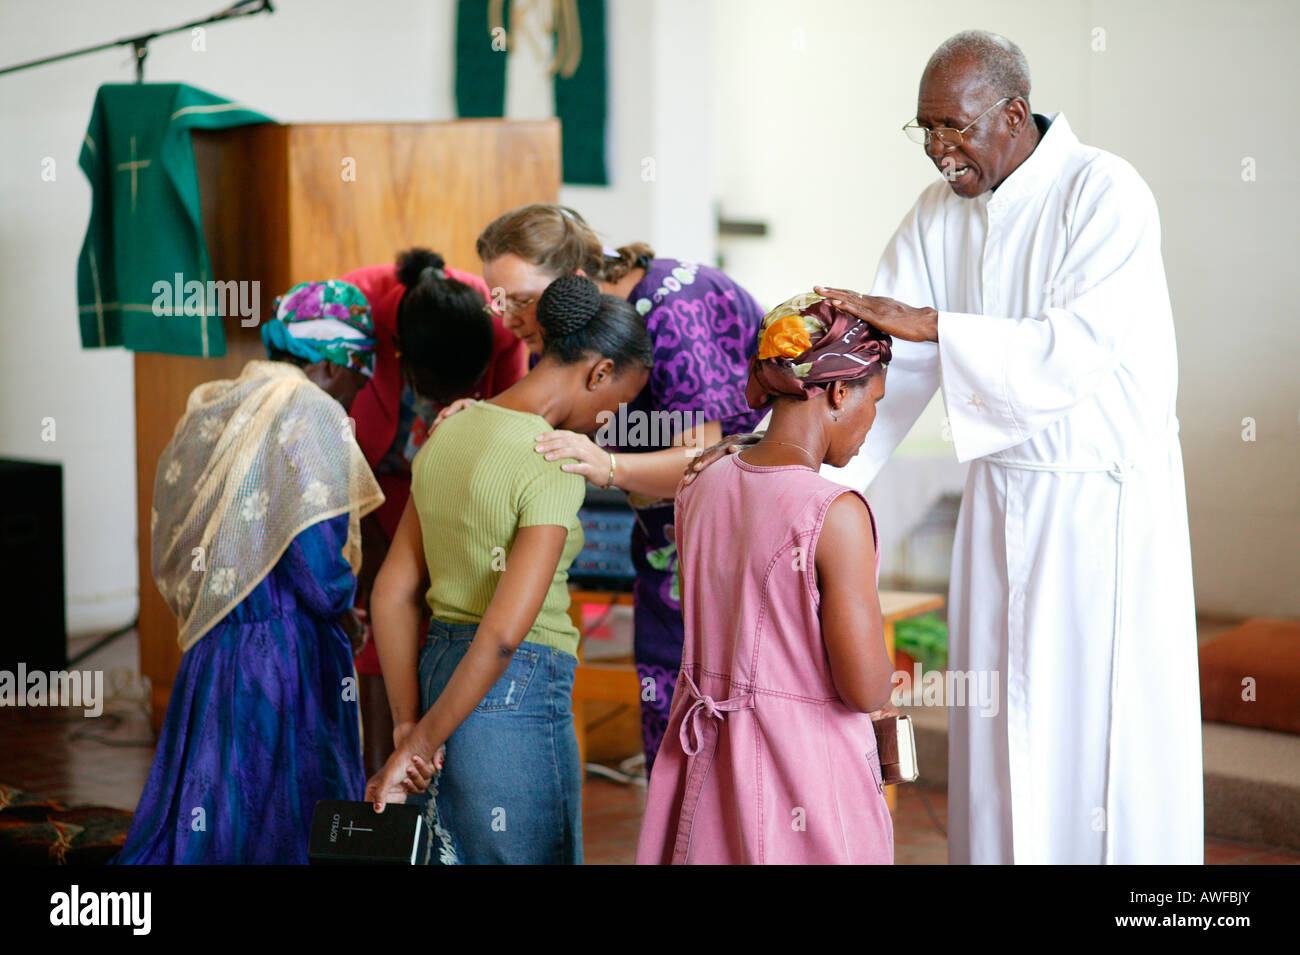 Priest giving blessings during mass, Francistown, Botswana, Africa Stock Photo